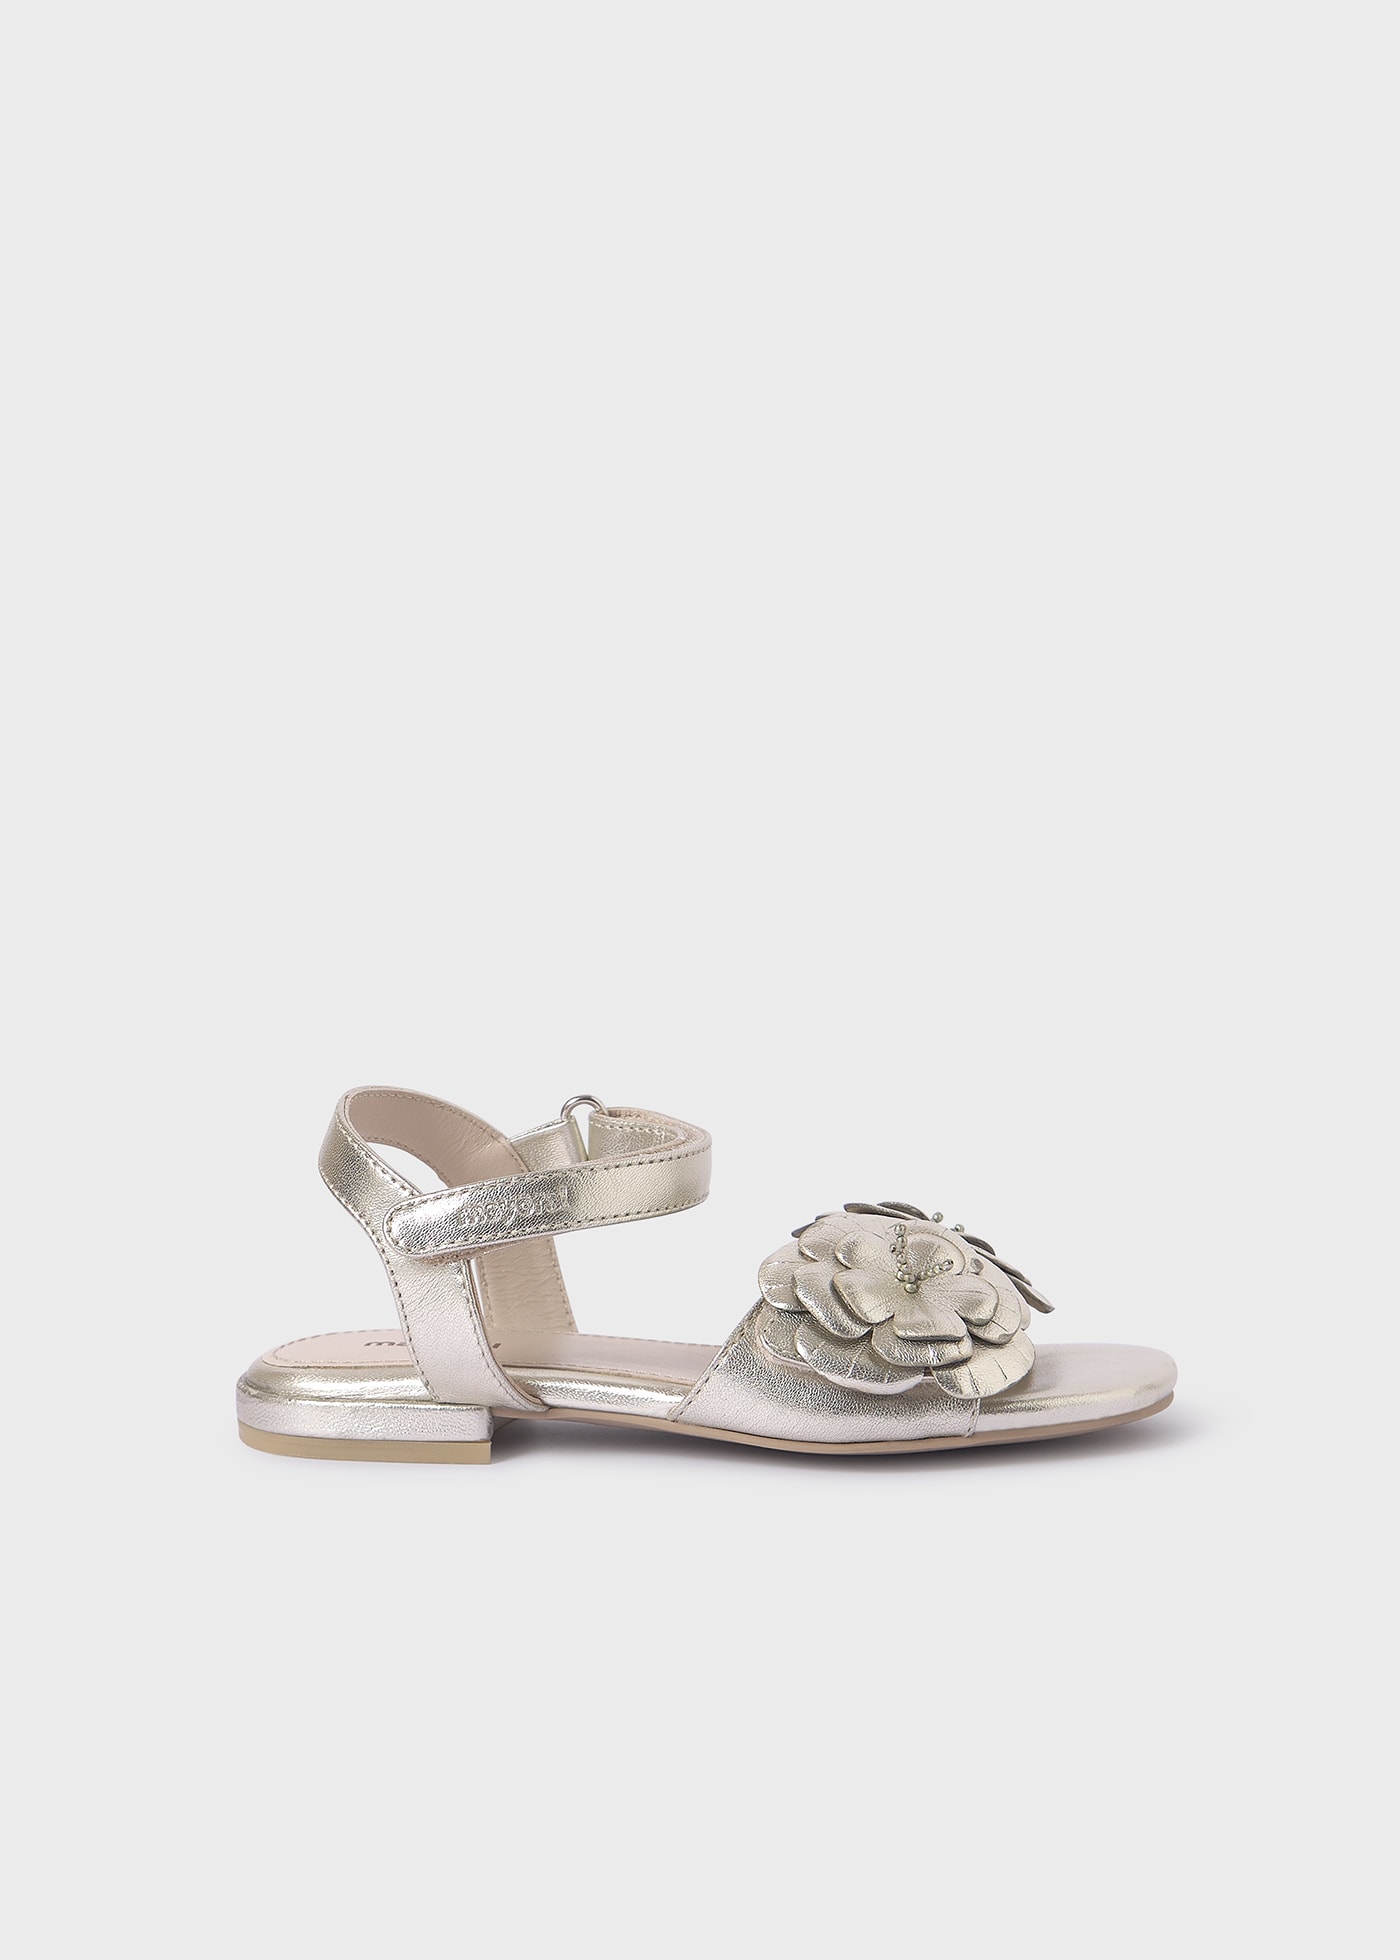 Girls metallic floral leather sandals